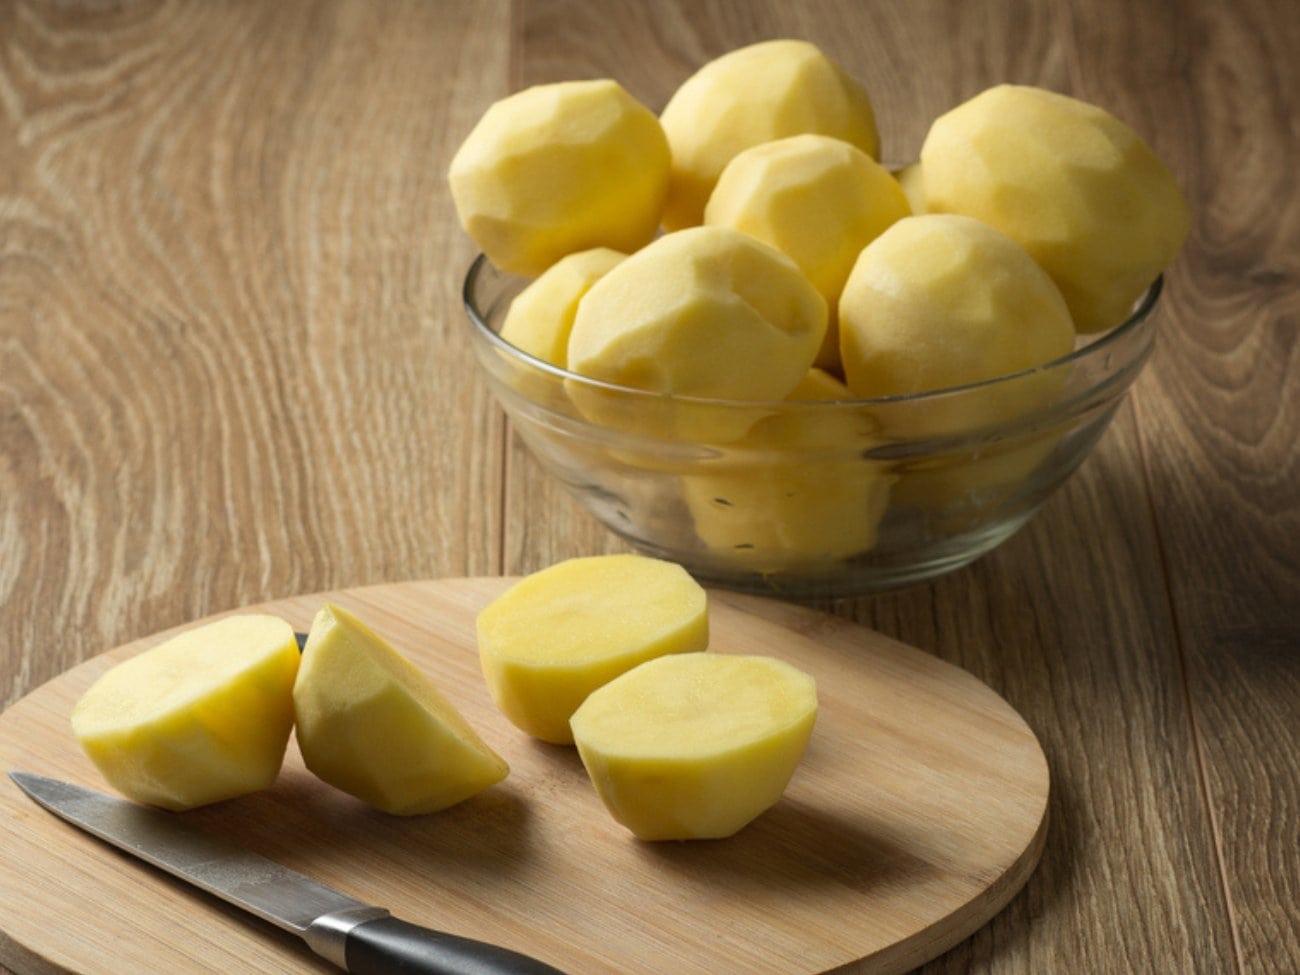 Peeled Potatoes in a Glass Bowl, Two Potatoes Cut in Half on a Wooden Chopping Board